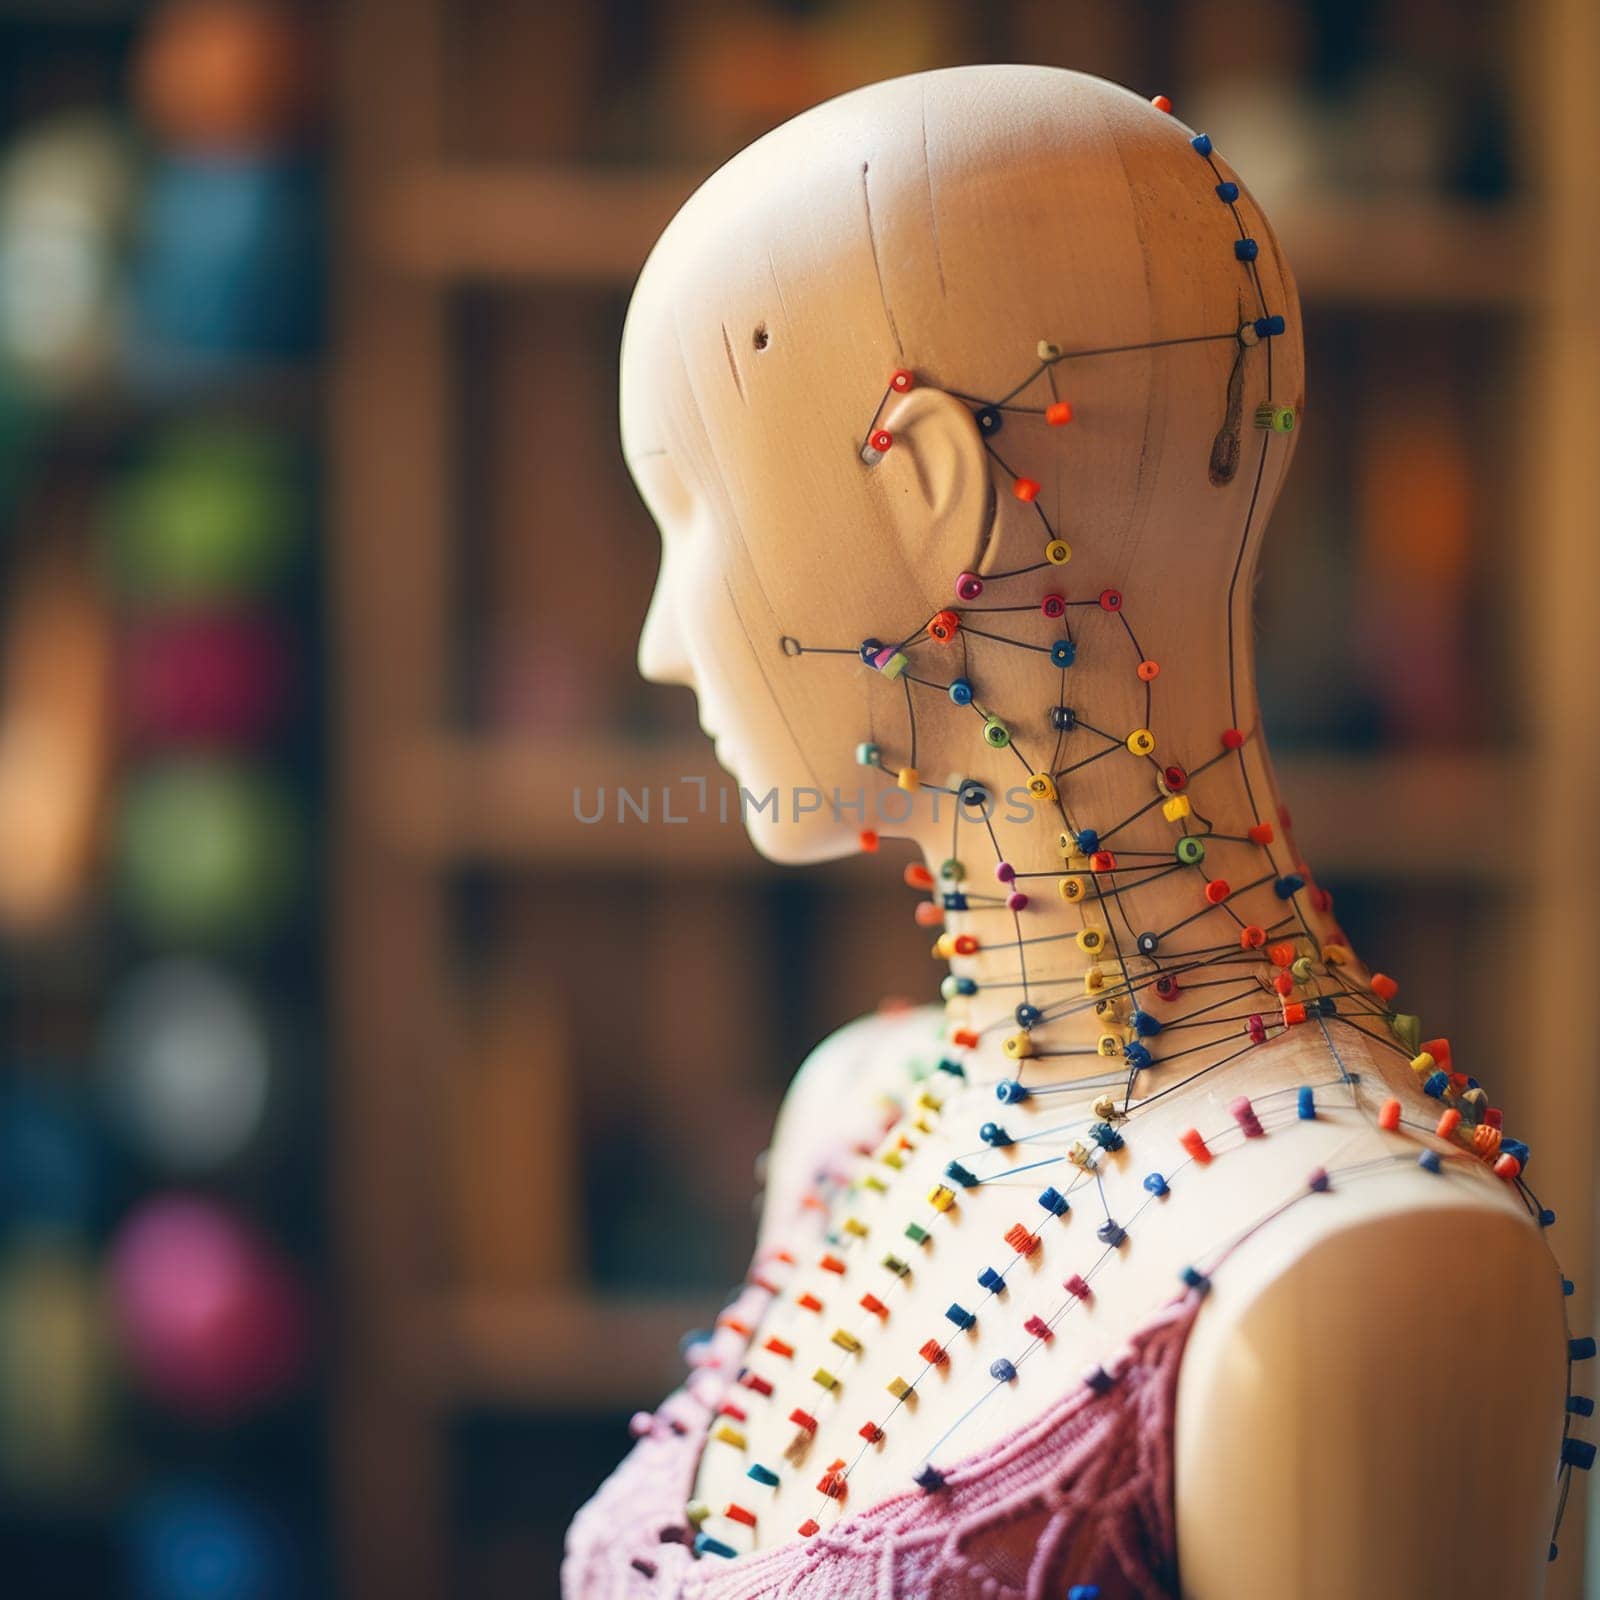 A mannequin with colorful beads on its head, AI by starush